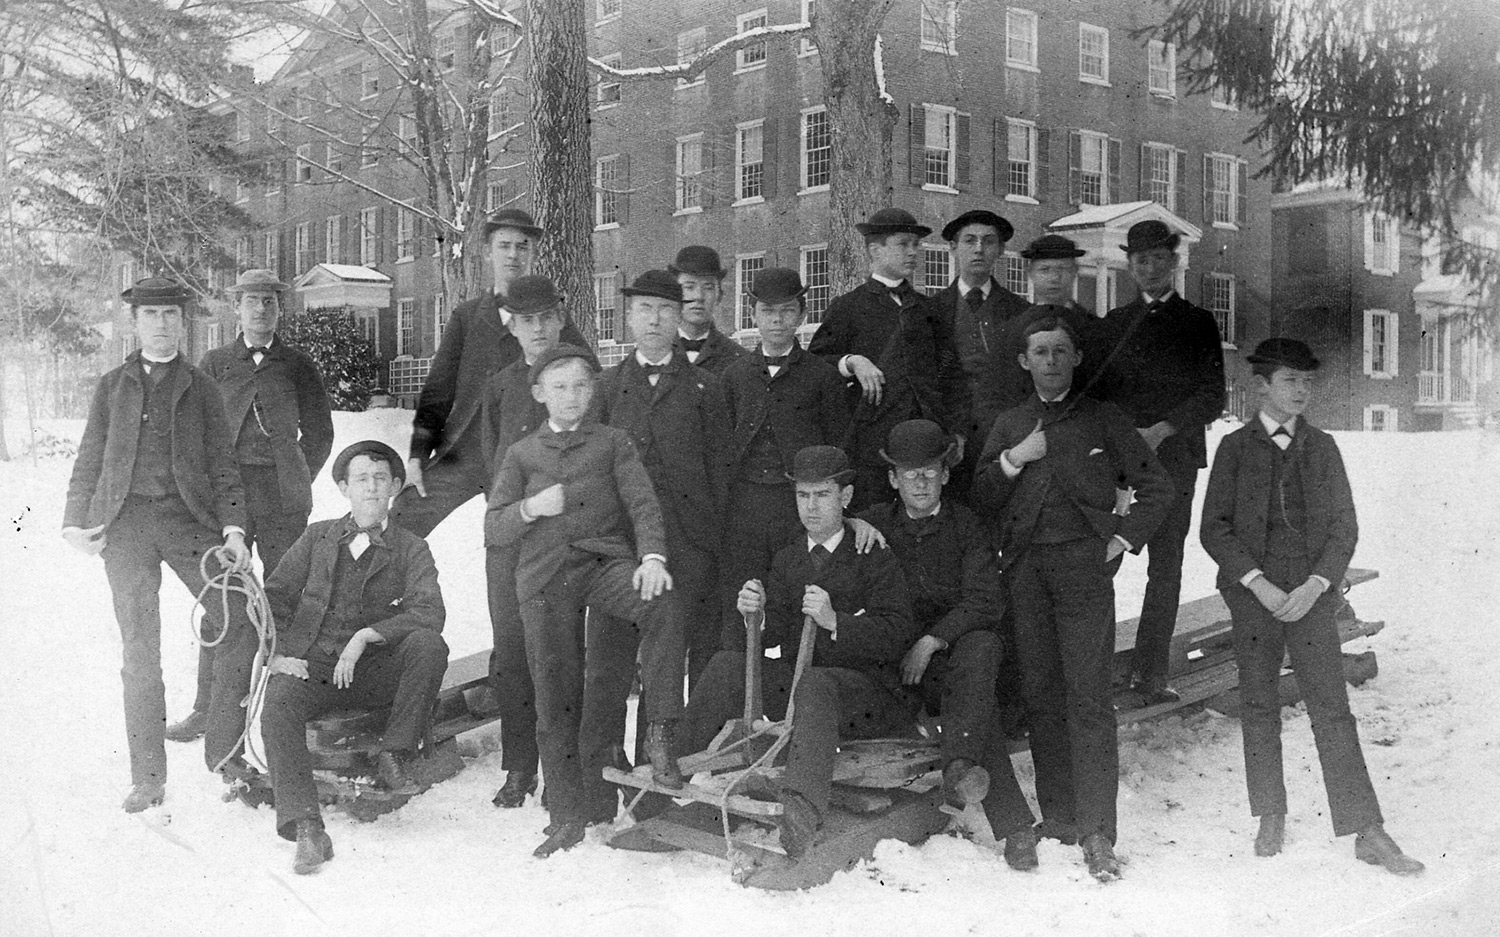 Group portrait of teenaged boys, some on large sleds, standing in front of a brick school building. 